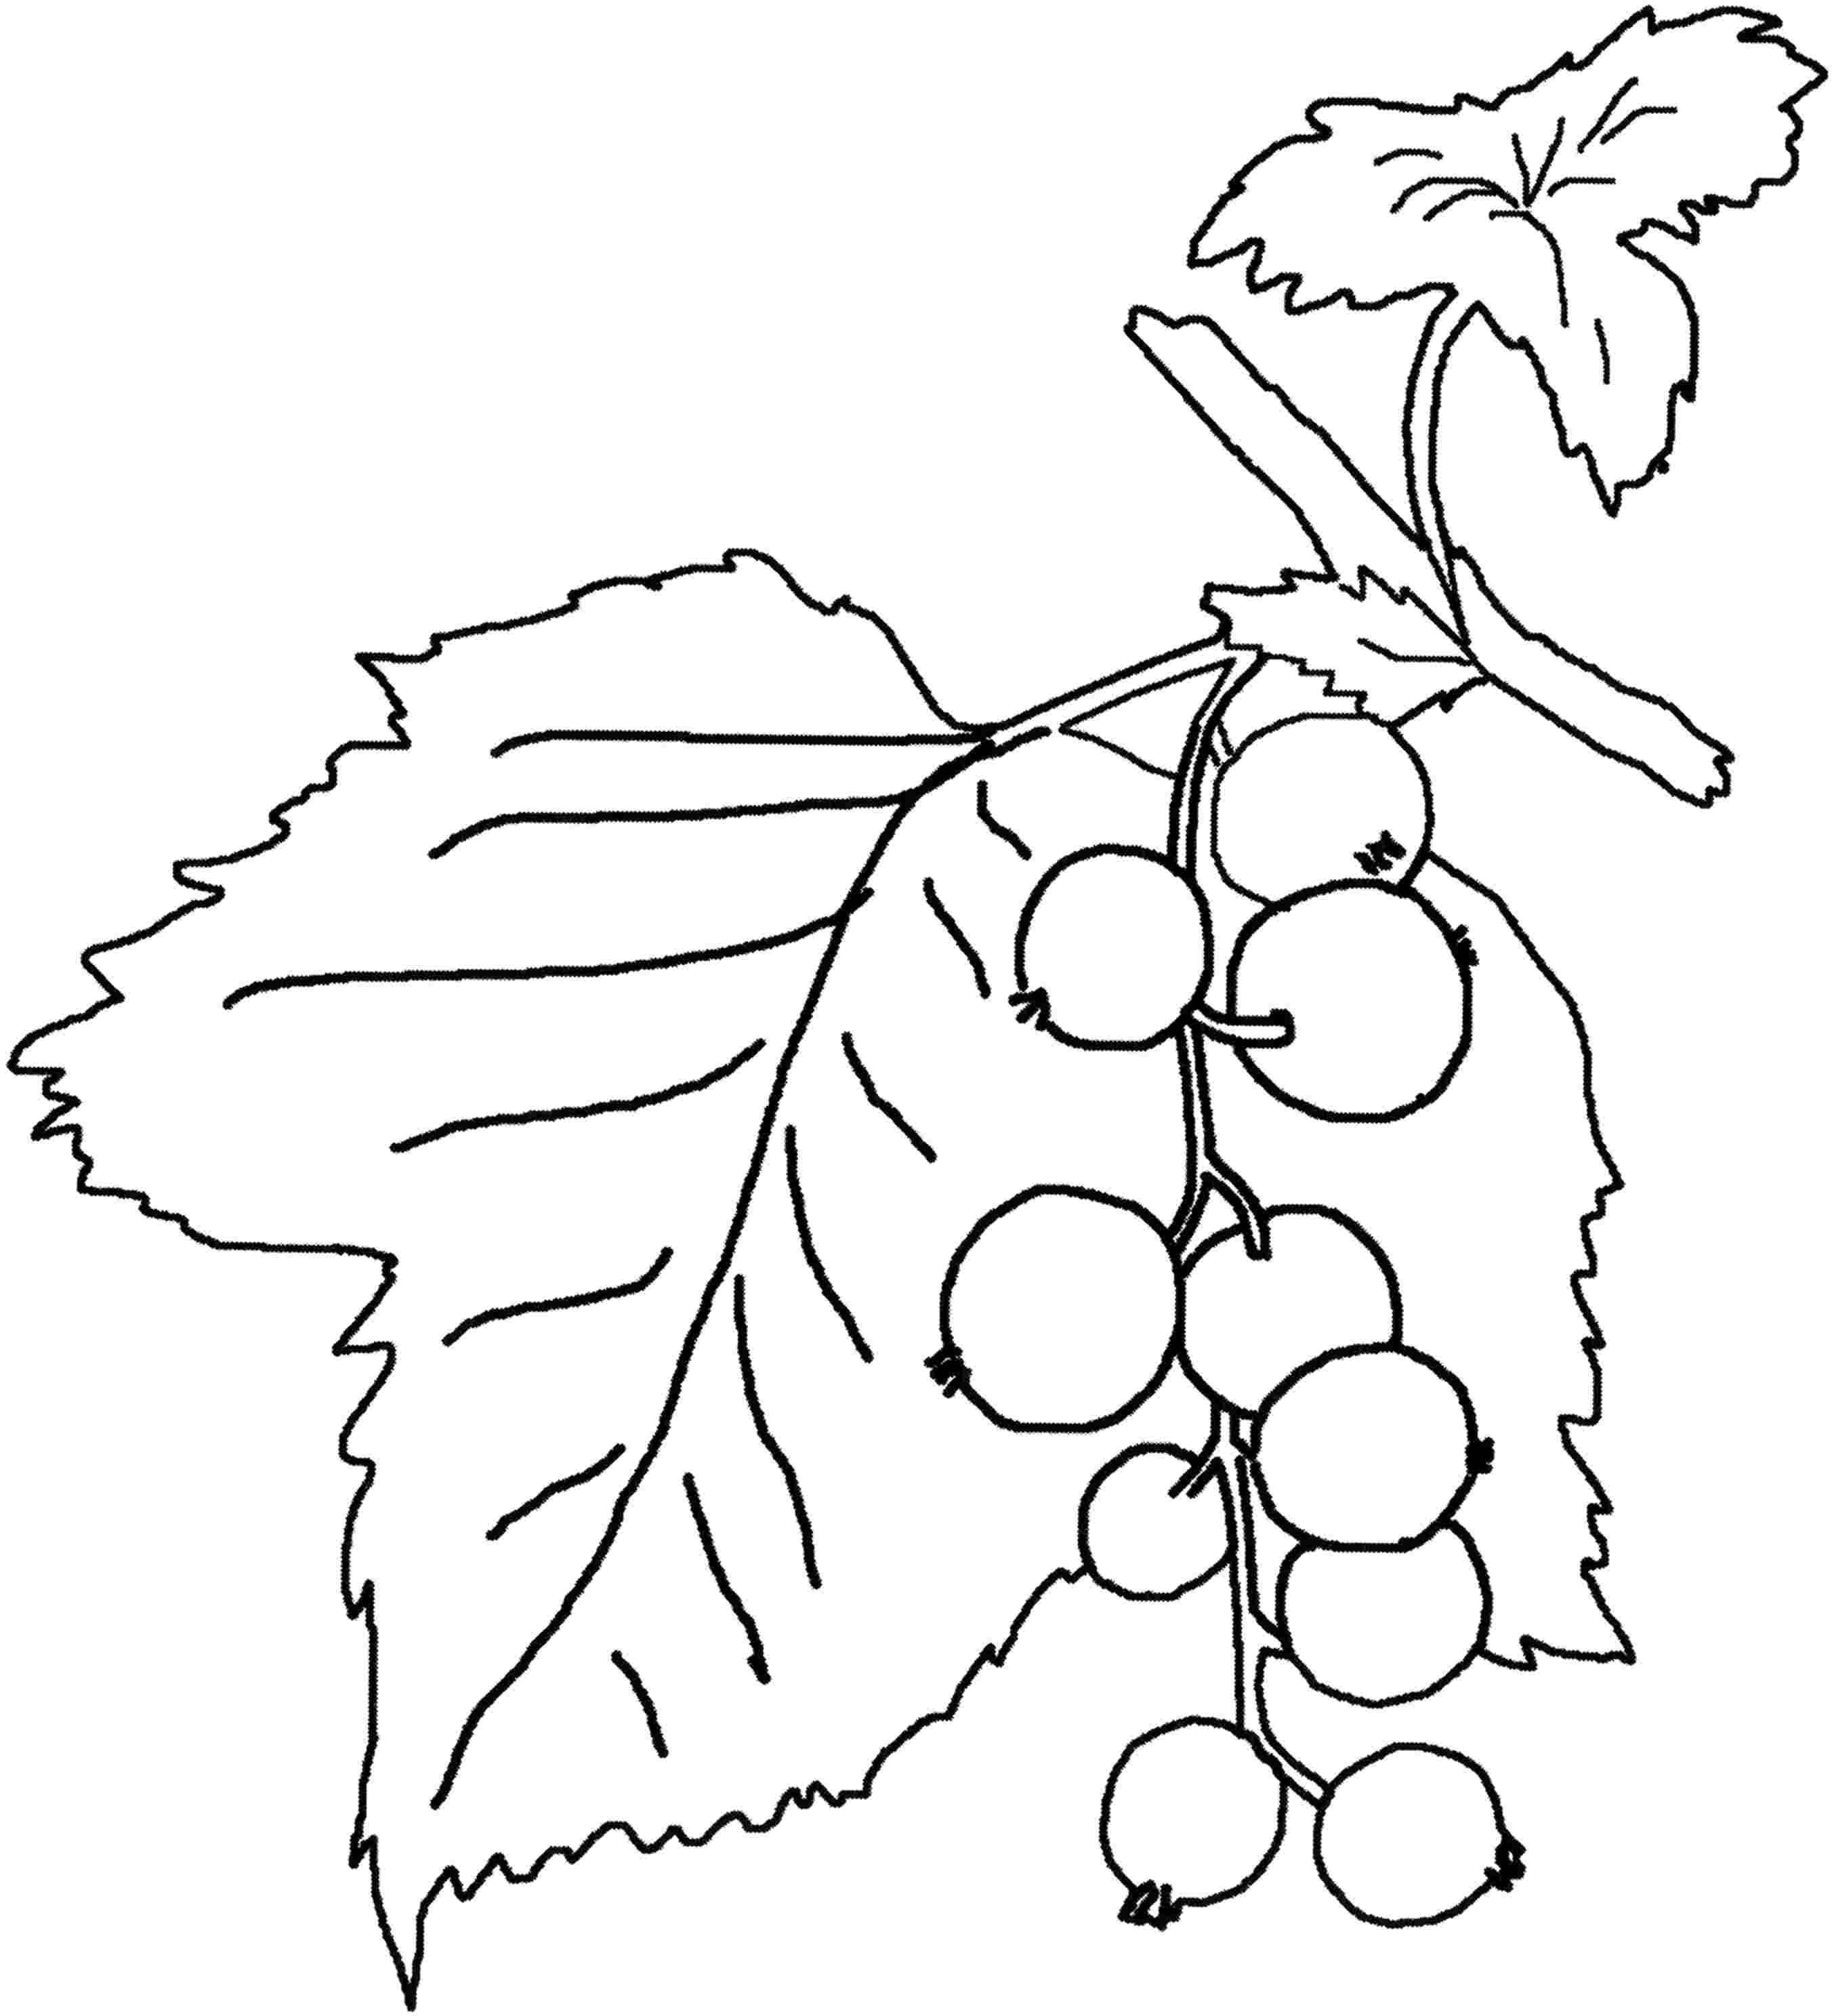 Coloring The picture branch of currant. Category Pets allowed. Tags:  currants.